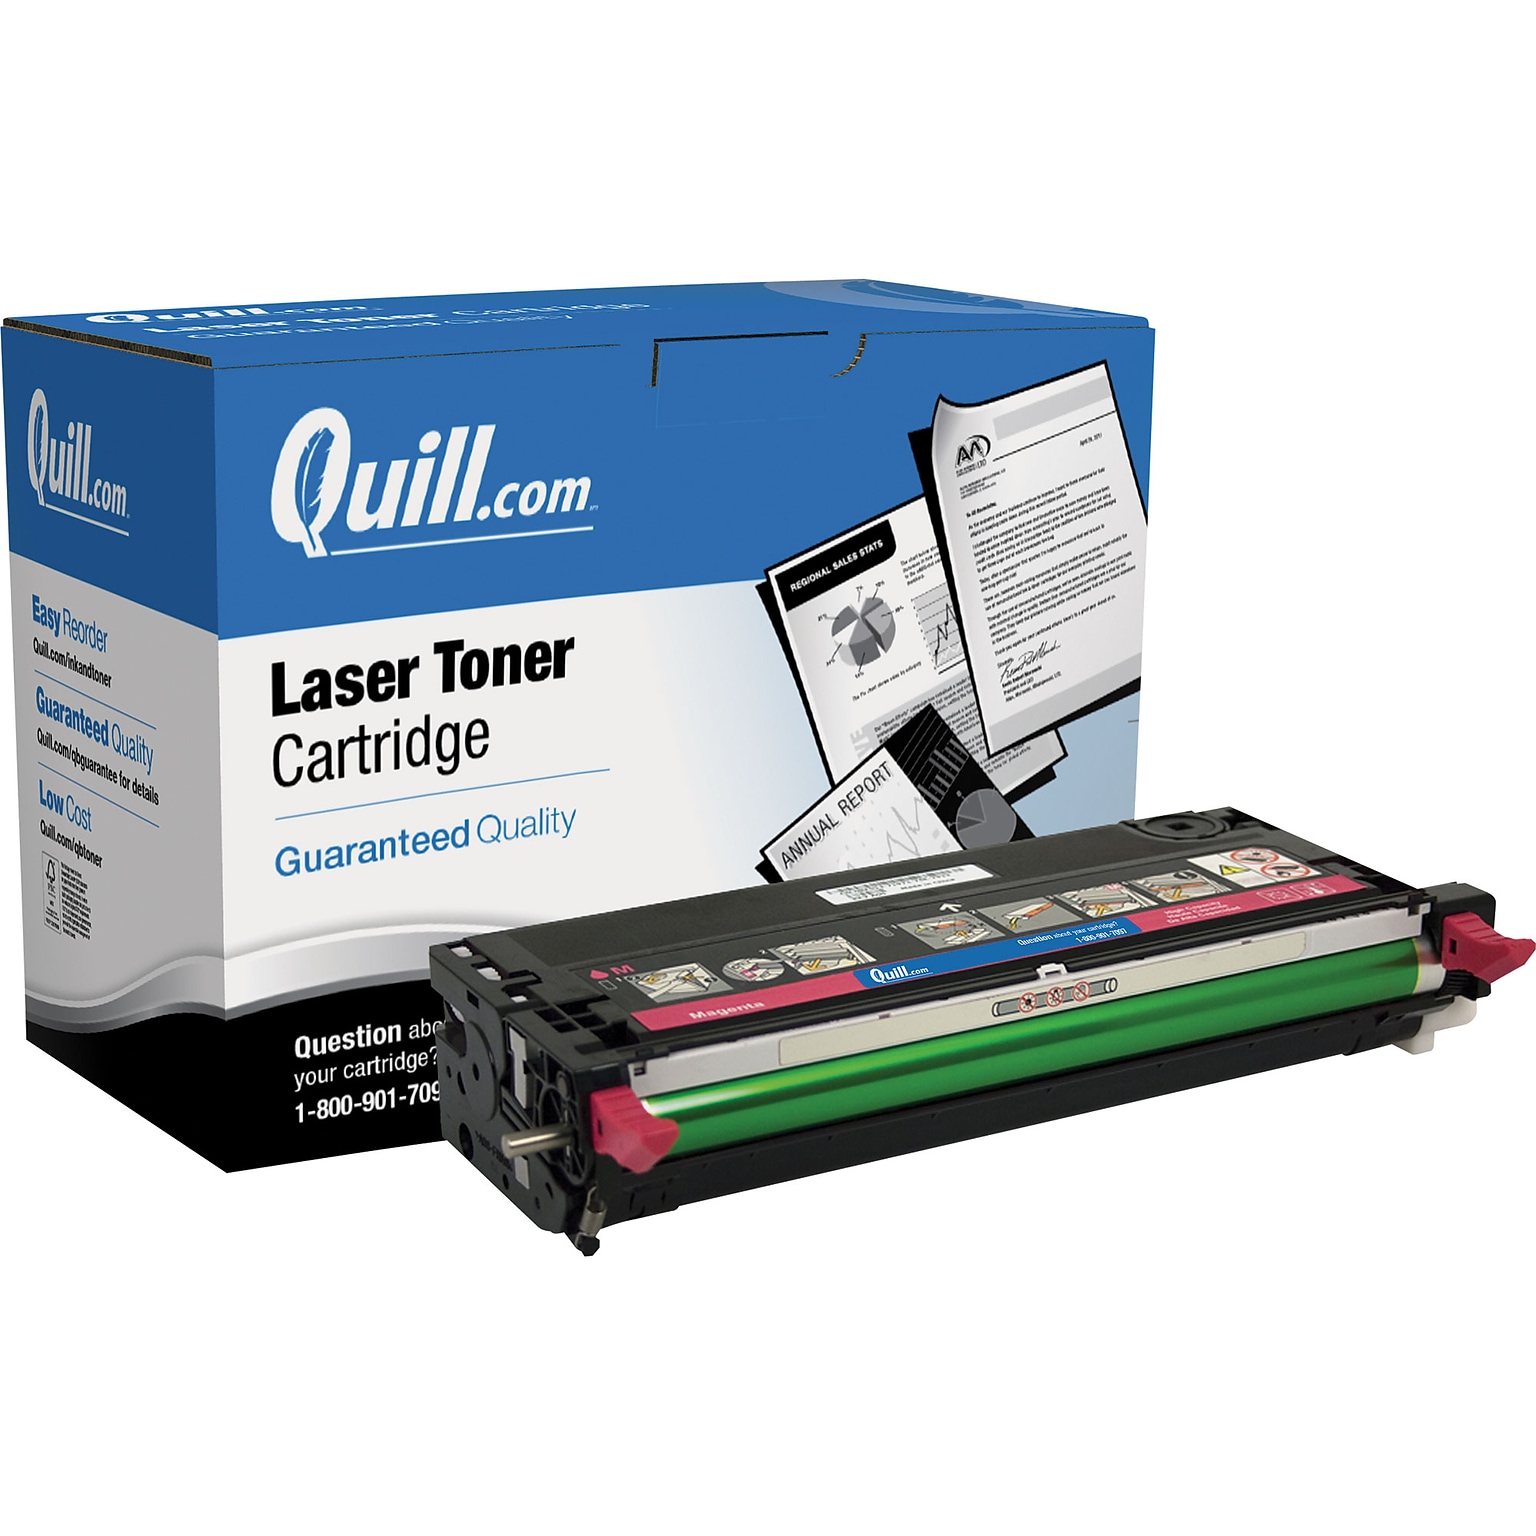 Quill Brand Remanufactured Laser Toner Cartridge for Dell™ 3110CN and 3115CN High Yield Magenta (100% Satisfaction Guaranteed)